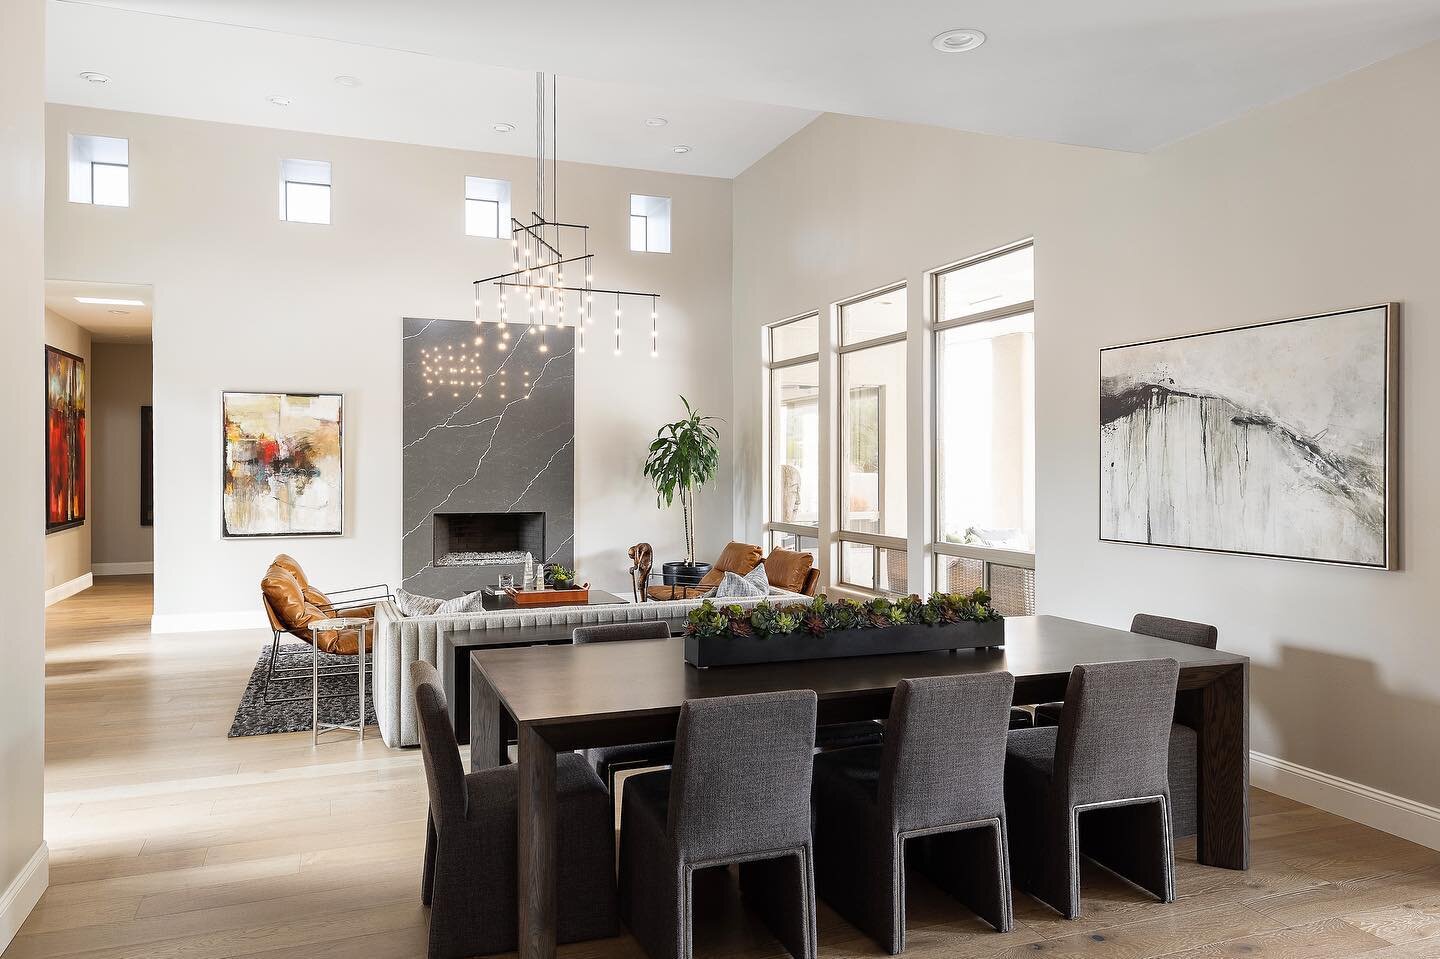 With lofty ceilings, abundant natural light, a tri-bar suspension chandelier, and comfortable yet unique seating details - the great room at our Scottsdale contemporary invites guests to experience Arizona living at its best. 
.
.
.
.
.
.
.
.
.
.
.
.